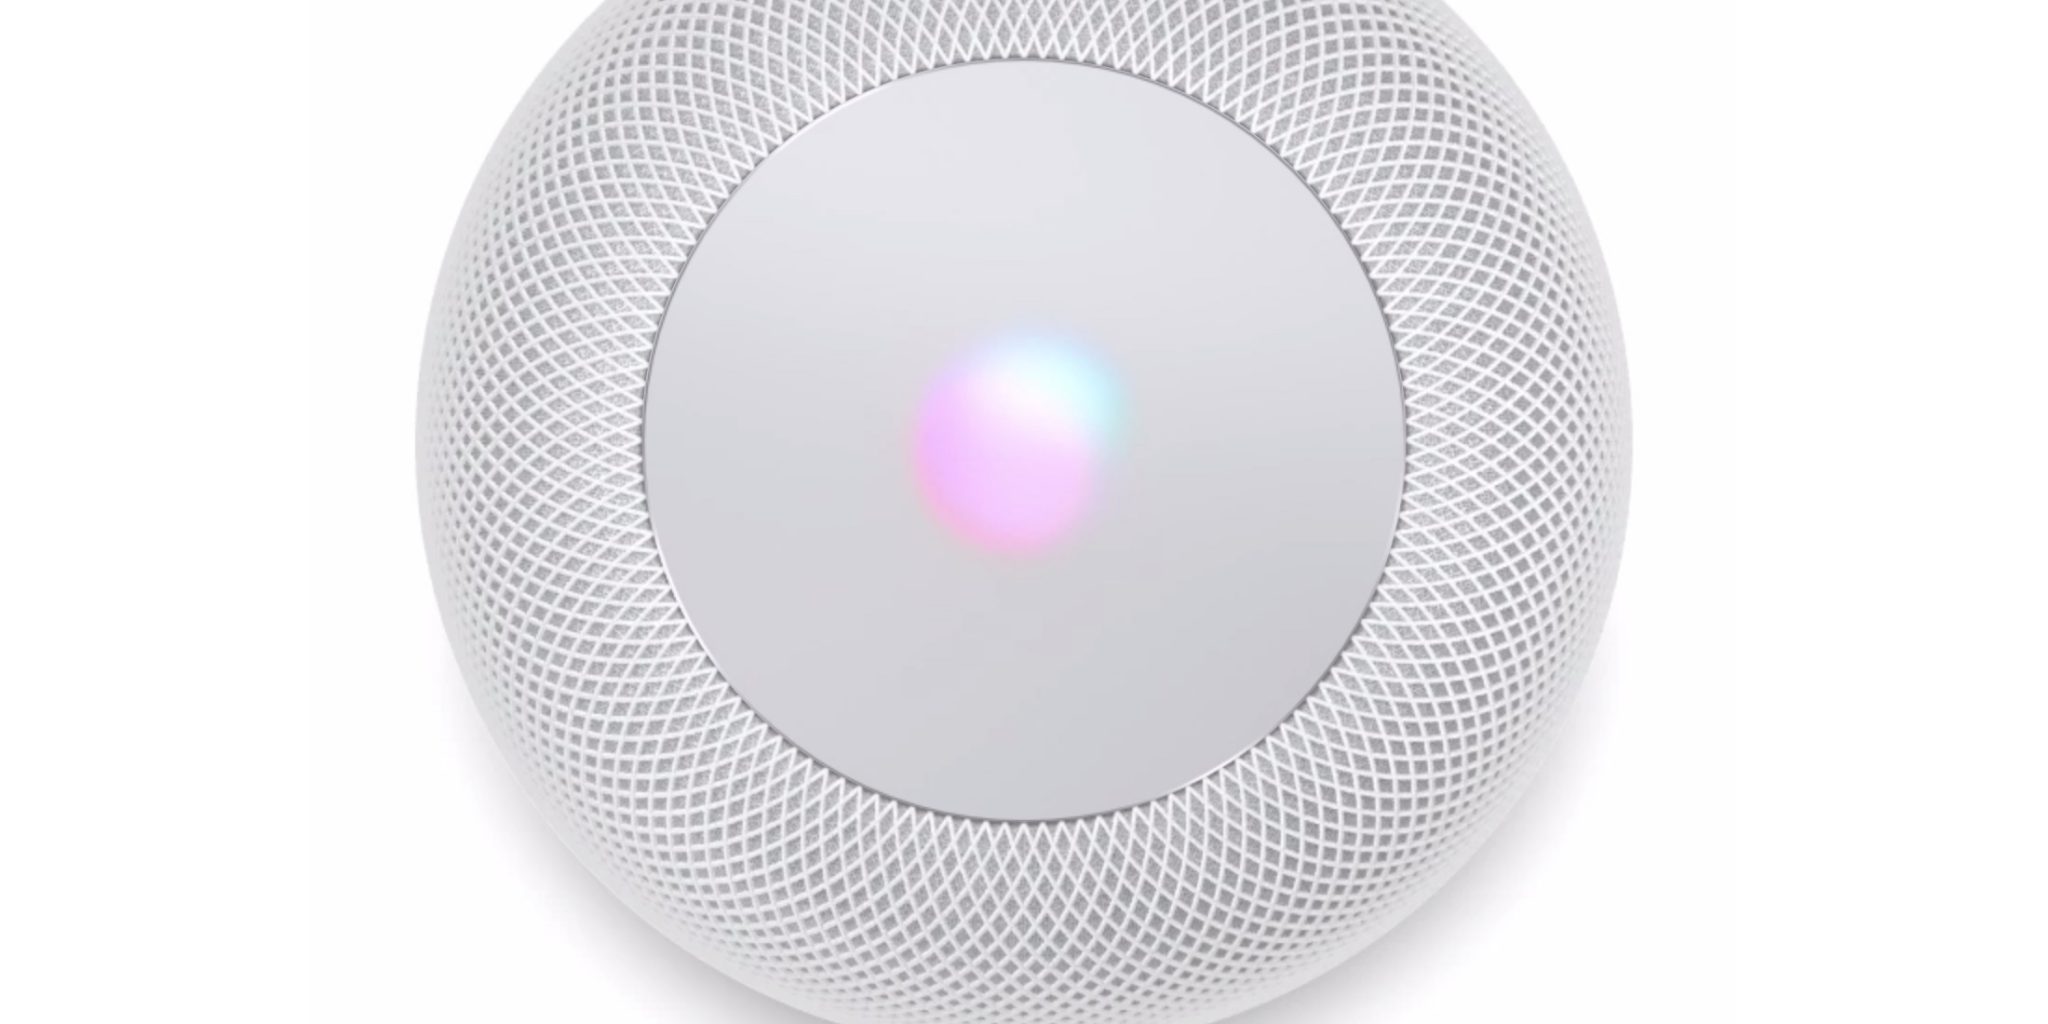 In the future, Face ID may be added to HomePod